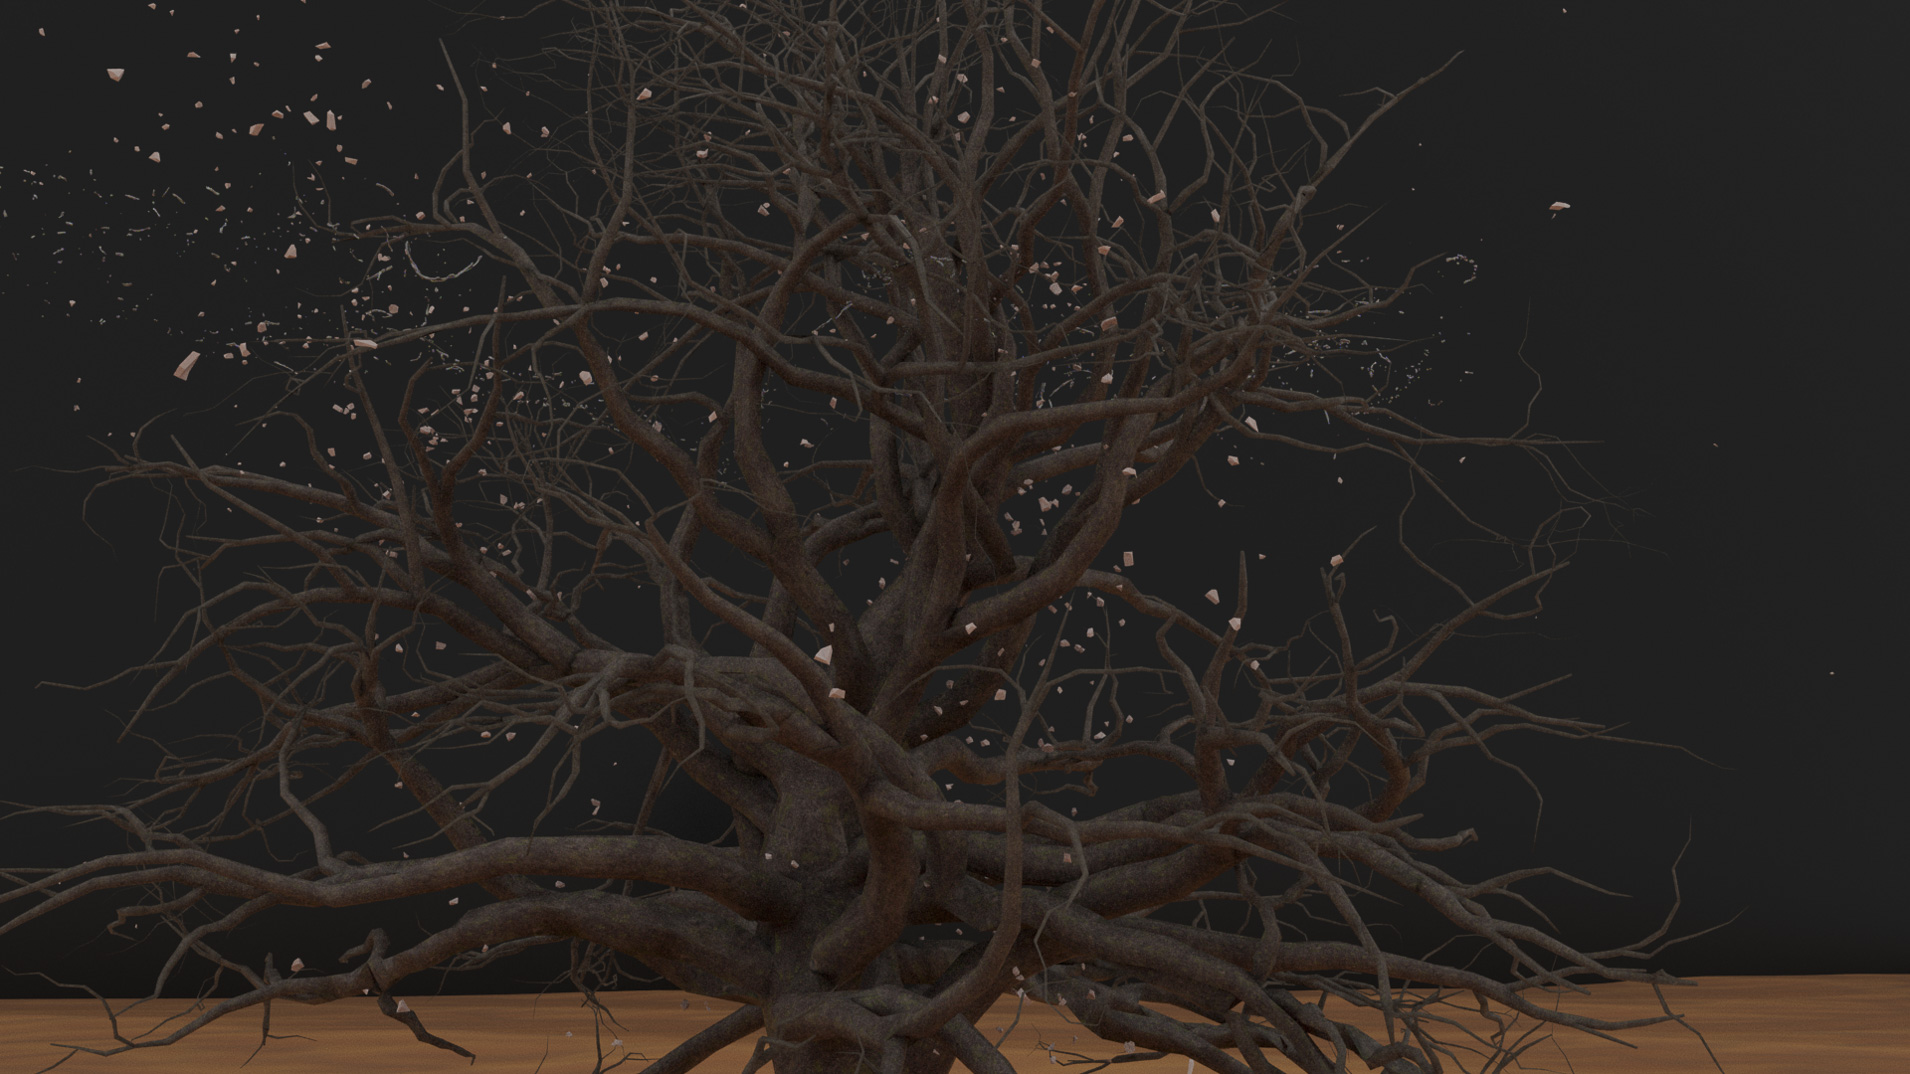 Still from a digital animation showing a tree 